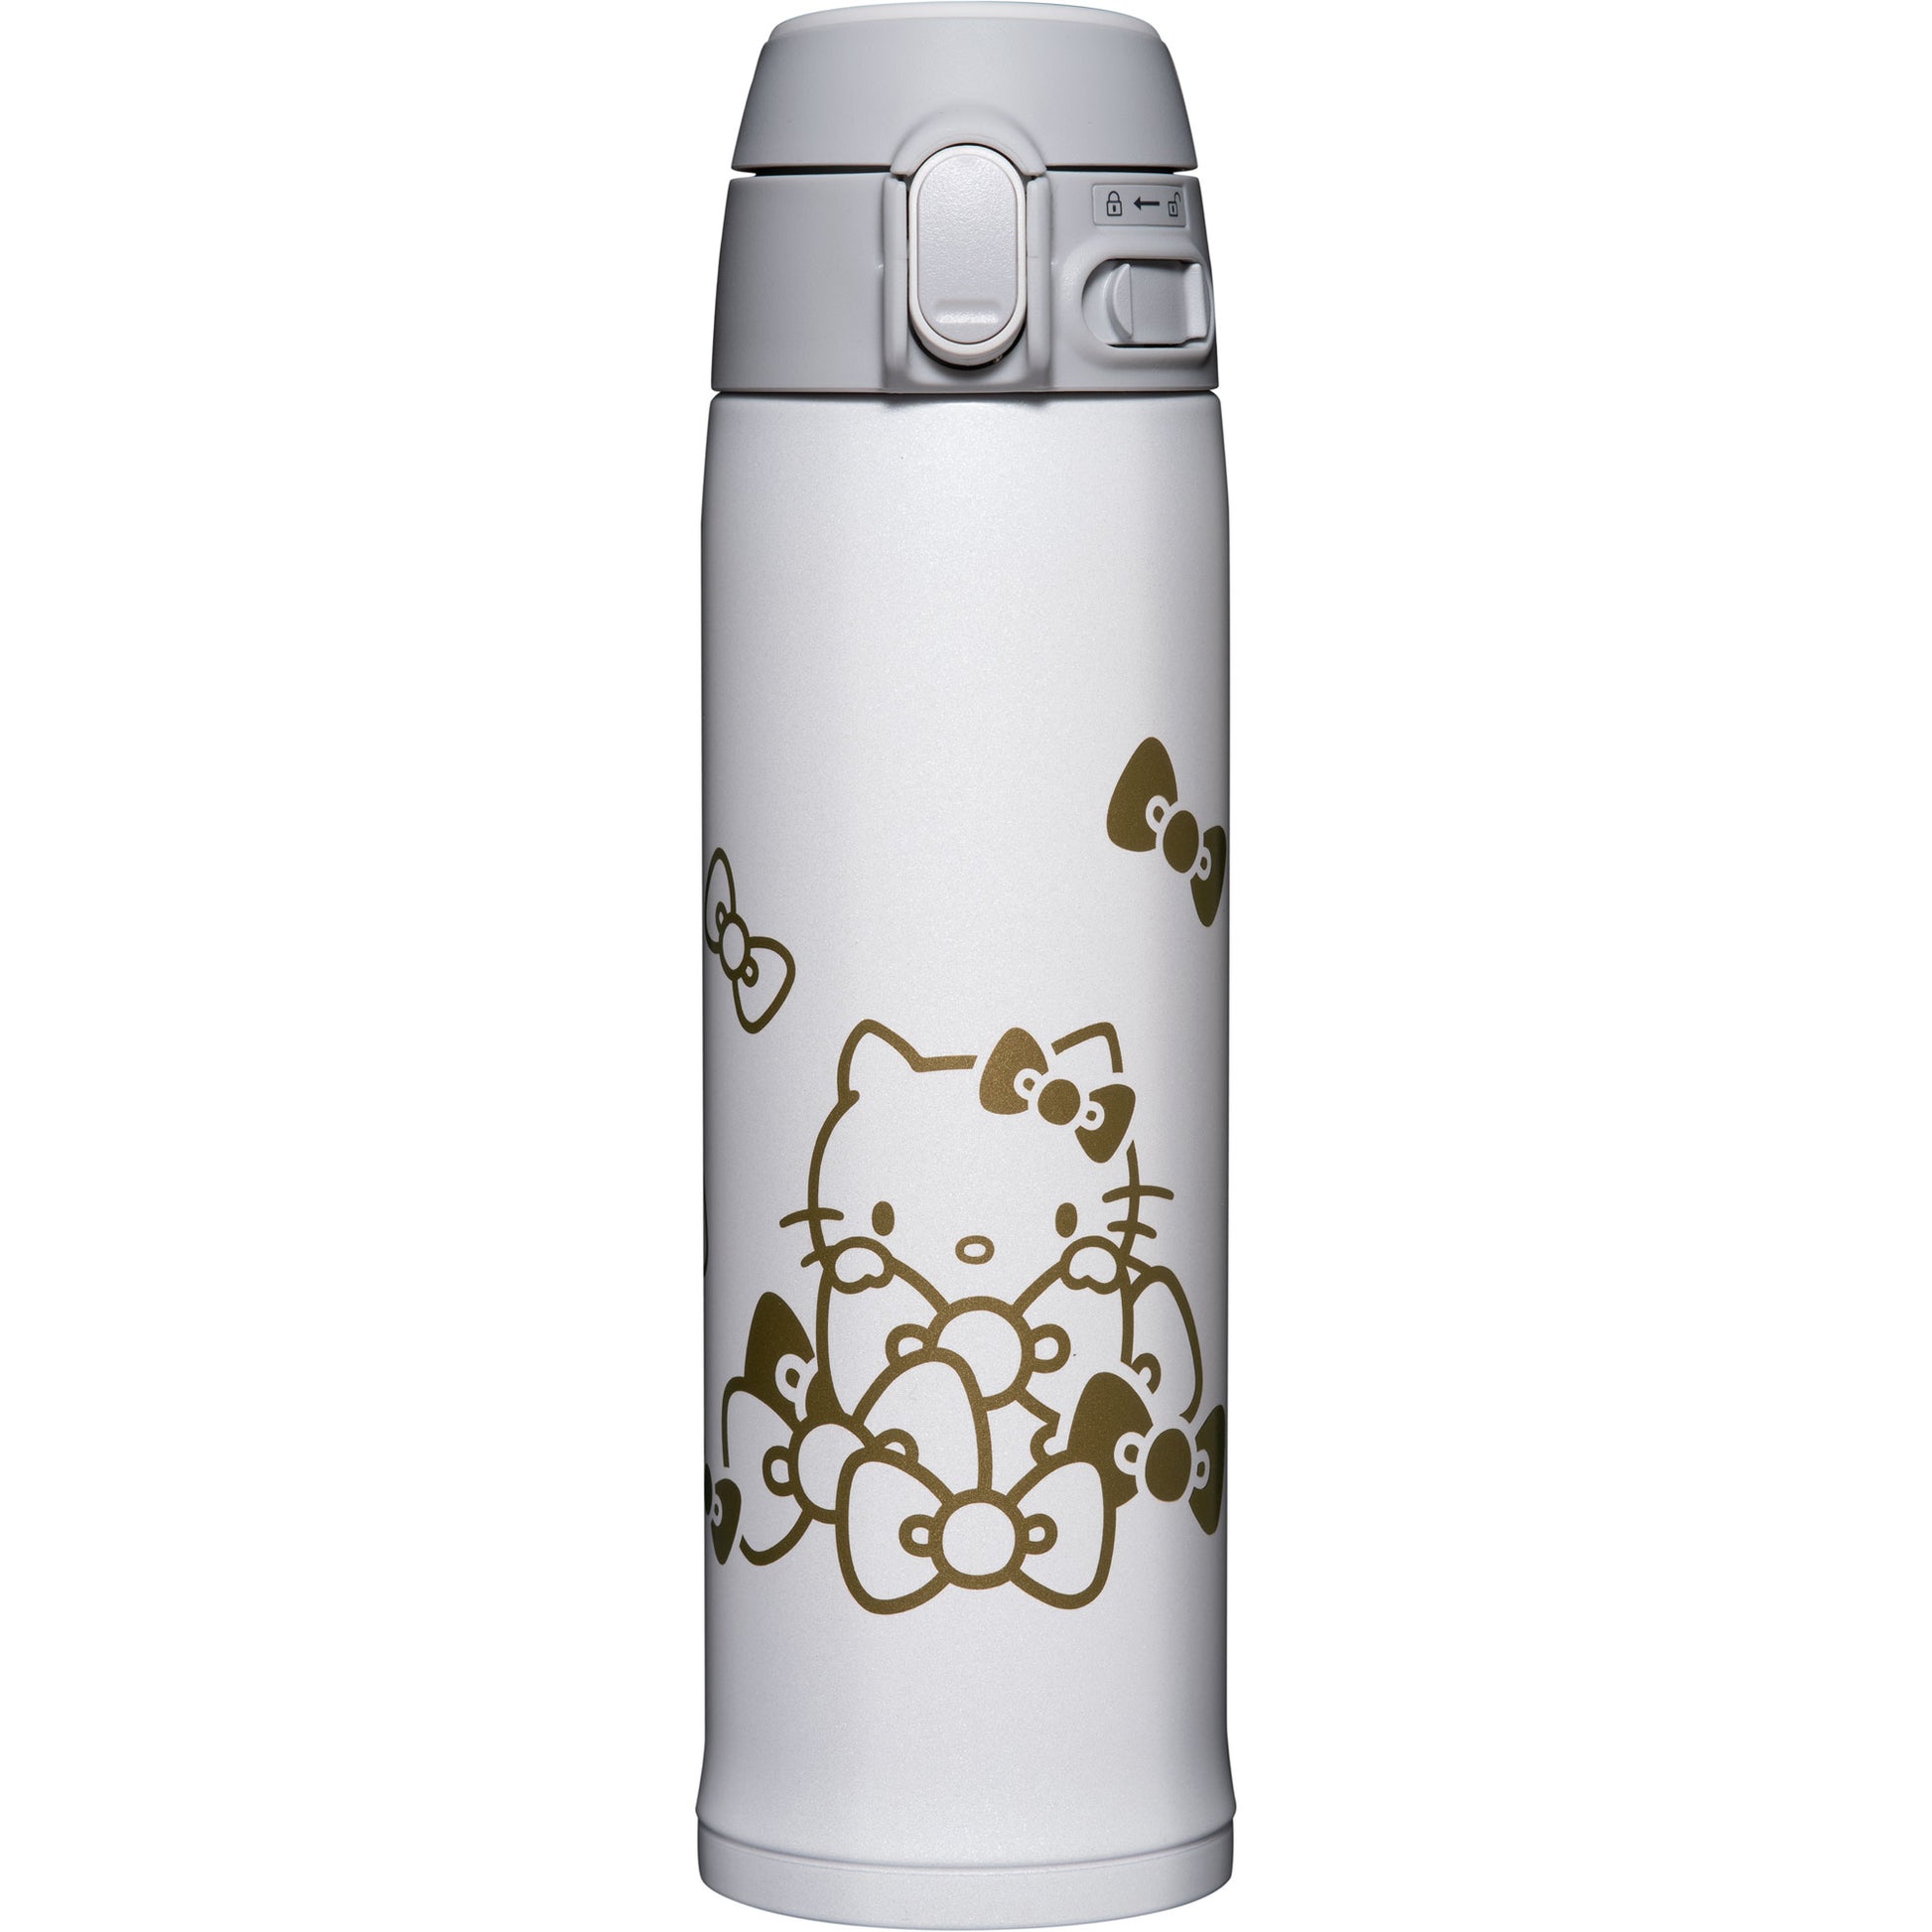 Stainless Steel Insulated Water Bottle Travel Coffee Mug,''Hello